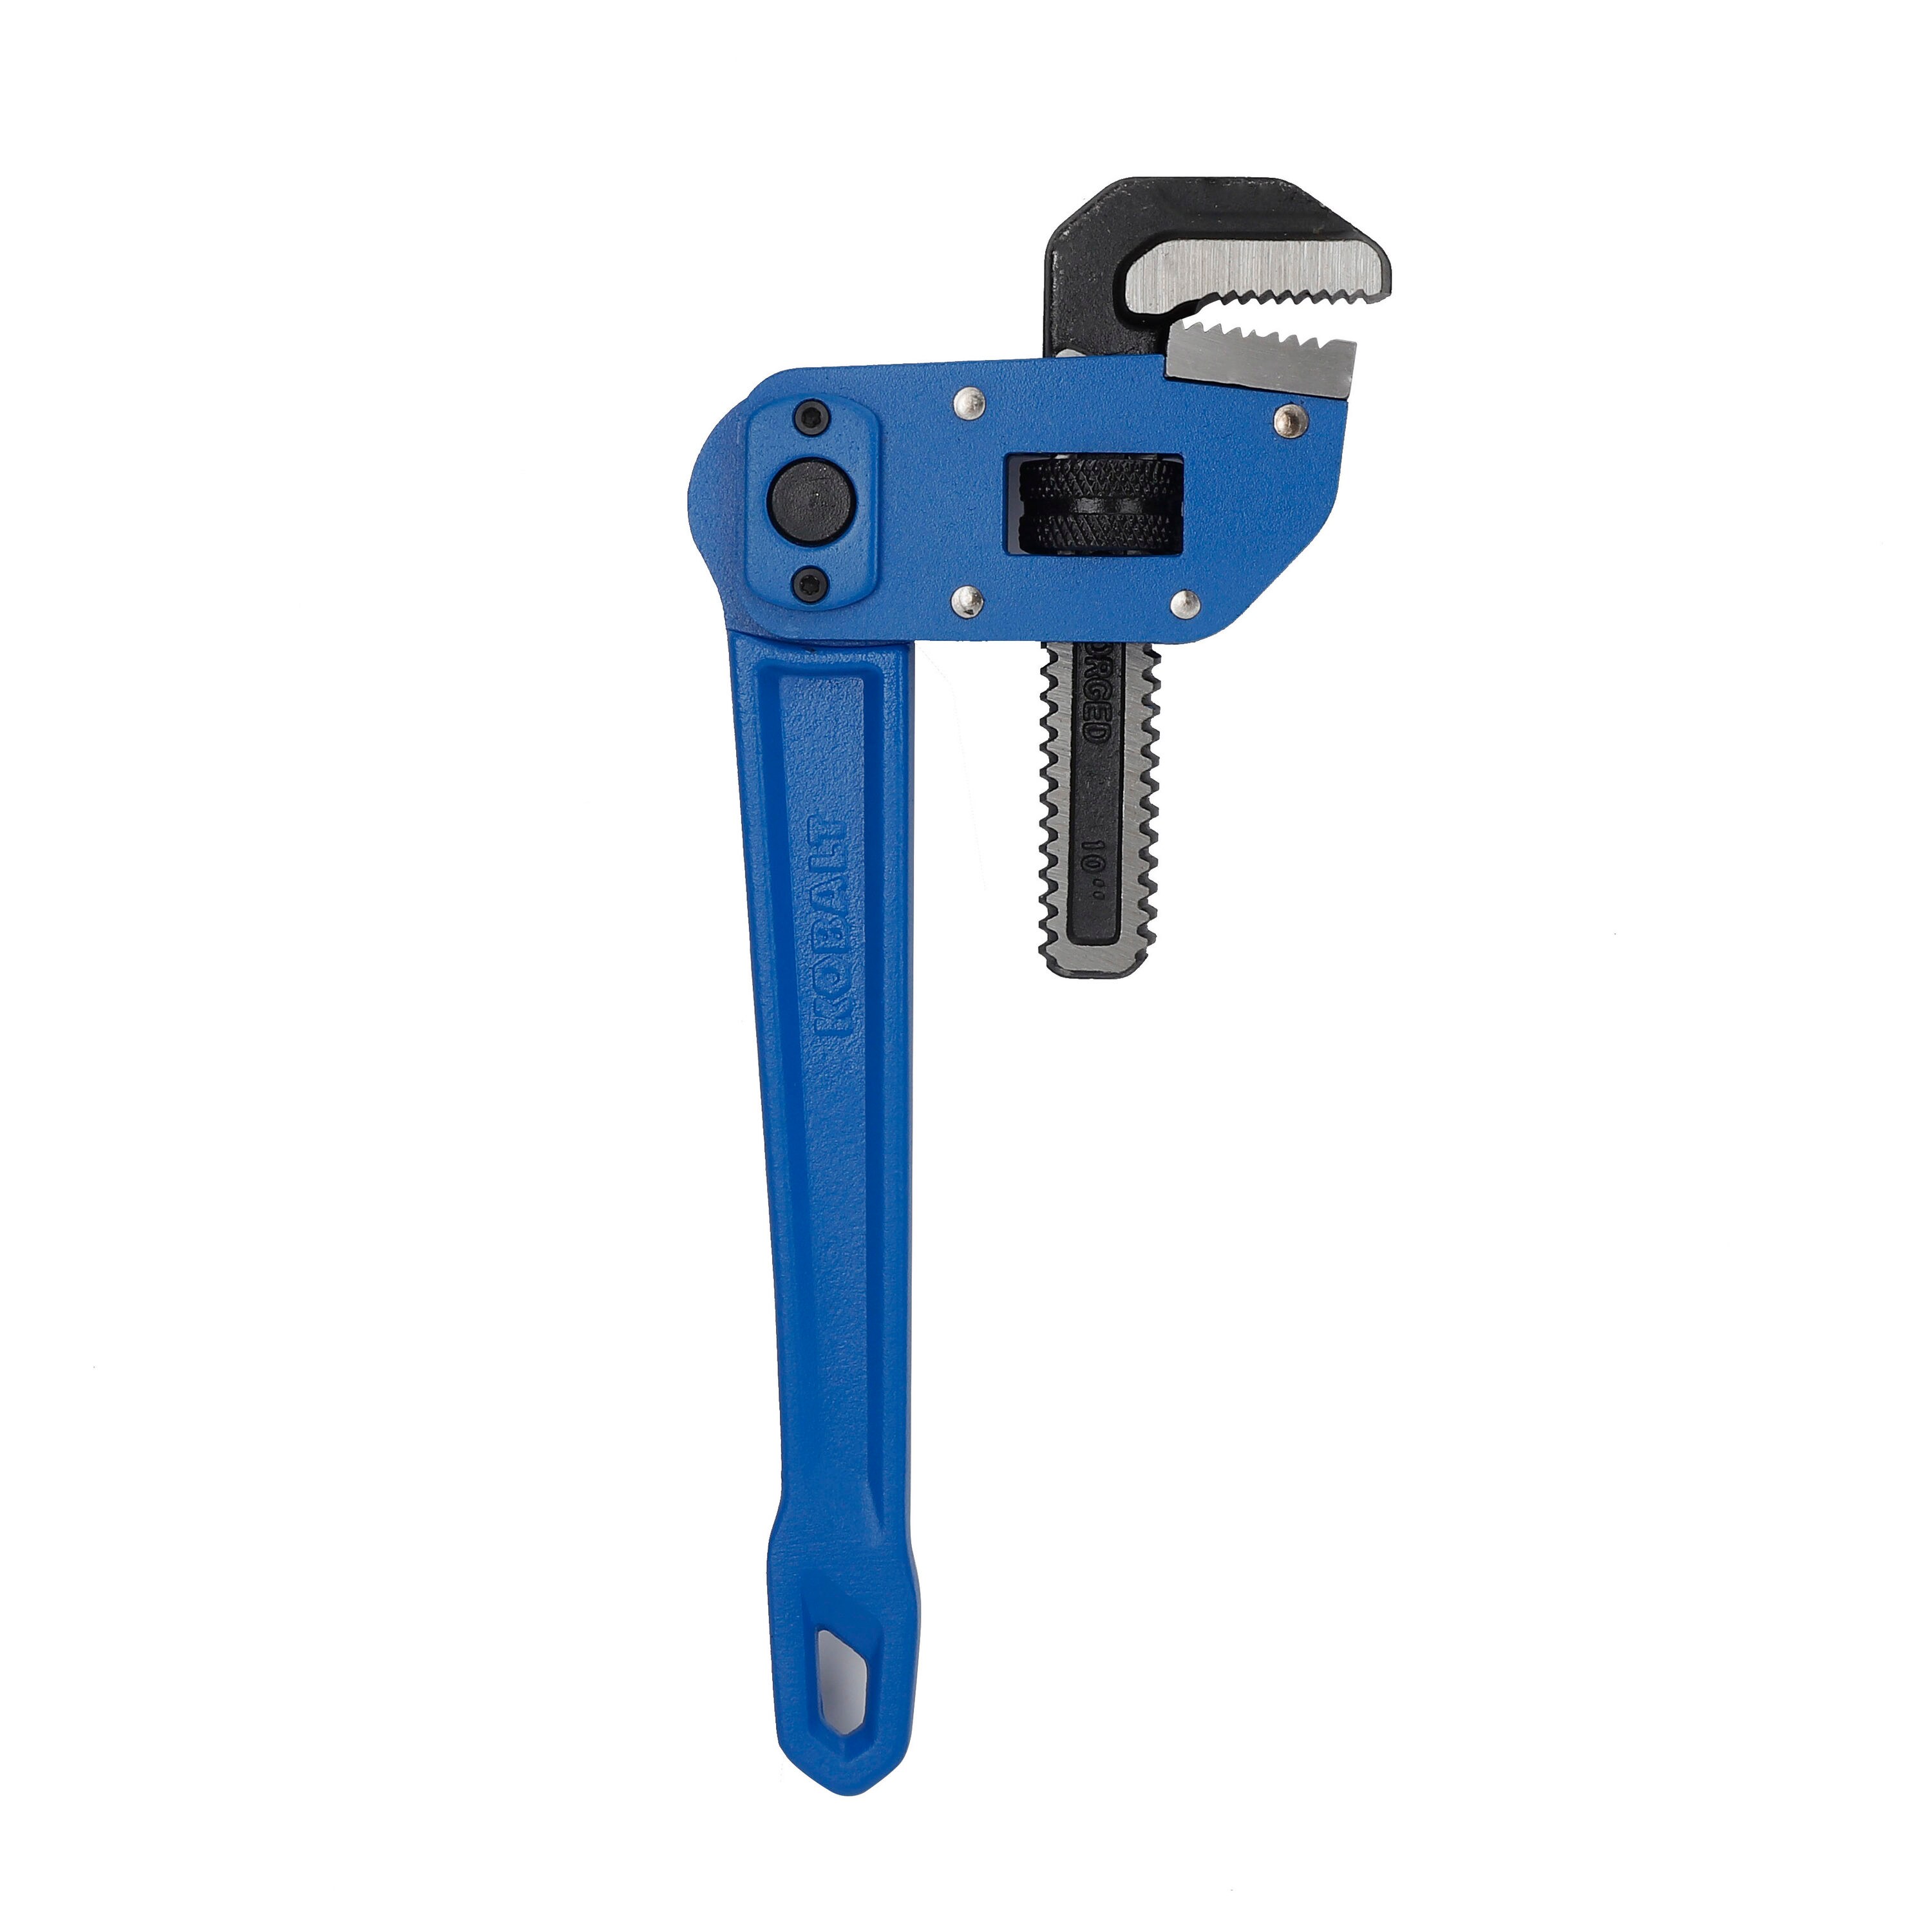 Husky 14 in. Heavy Duty Cast Iron Pipe Wrench with 1-1/2 in. Jaw